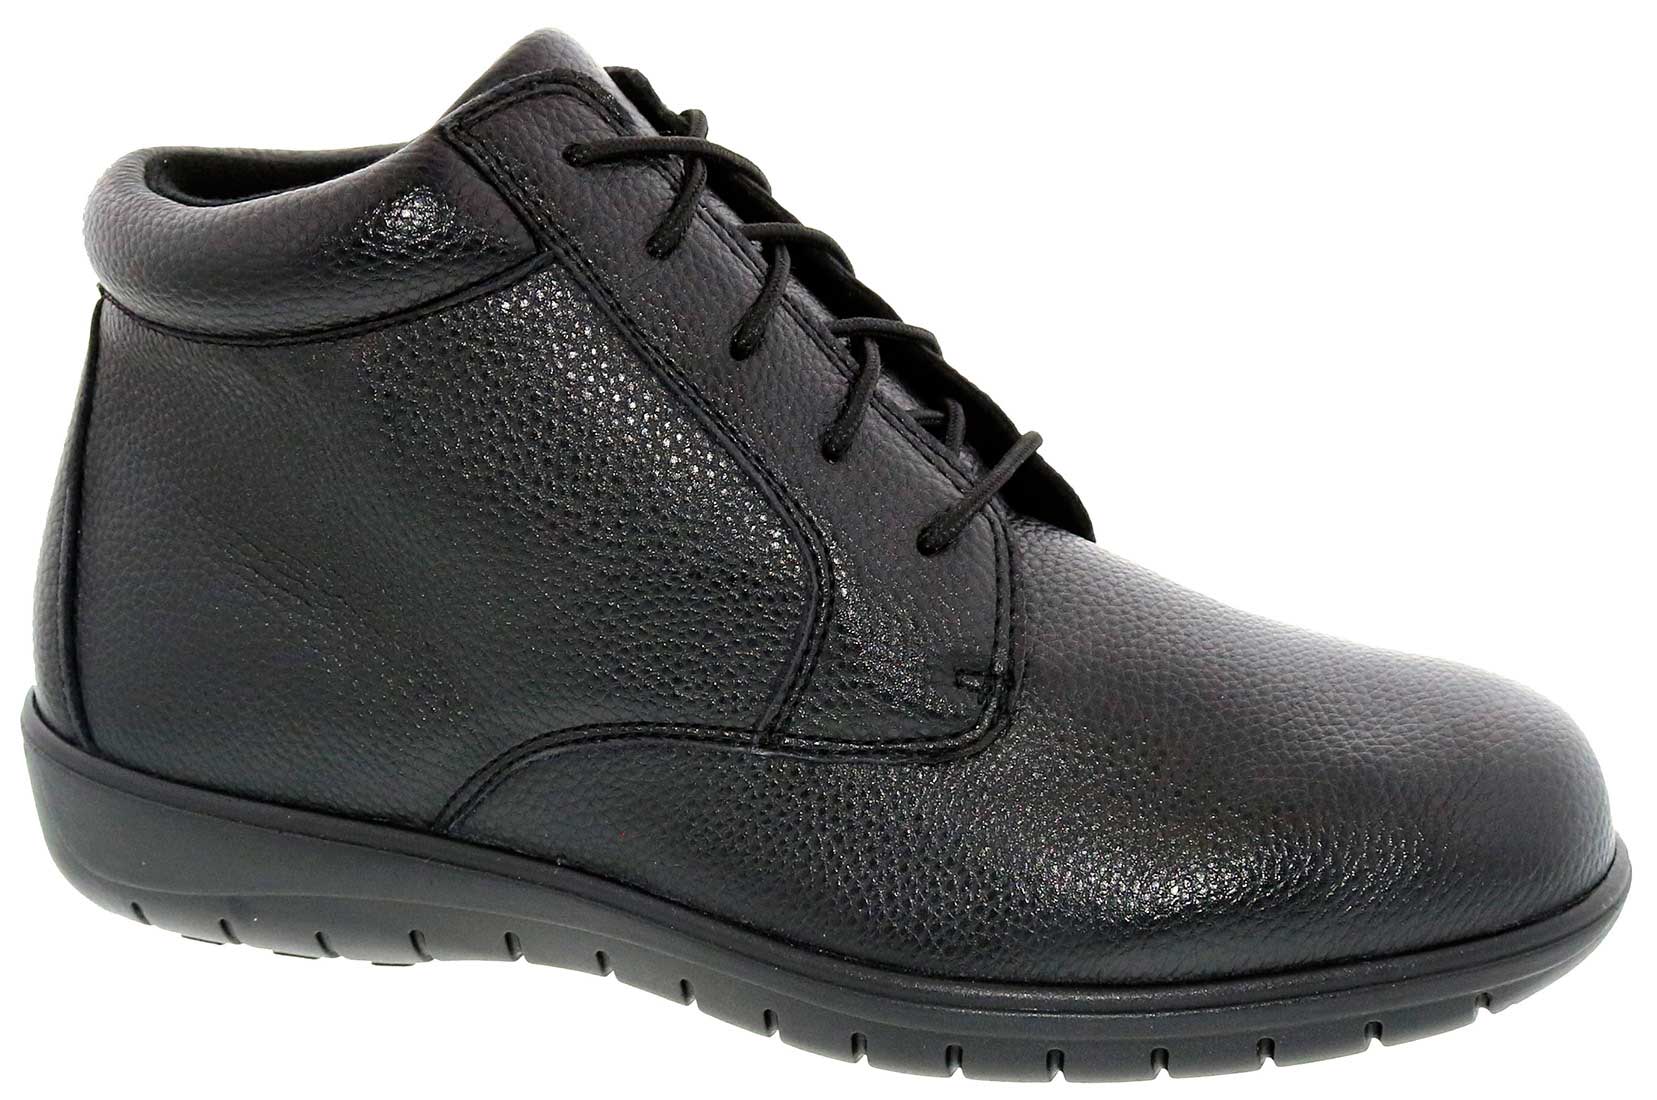 Footsaver Shoes Domino 90678 - Men's 2 Comfort Therapeutic  Diabetic Casual Boot - Extra Depth For Orthotics